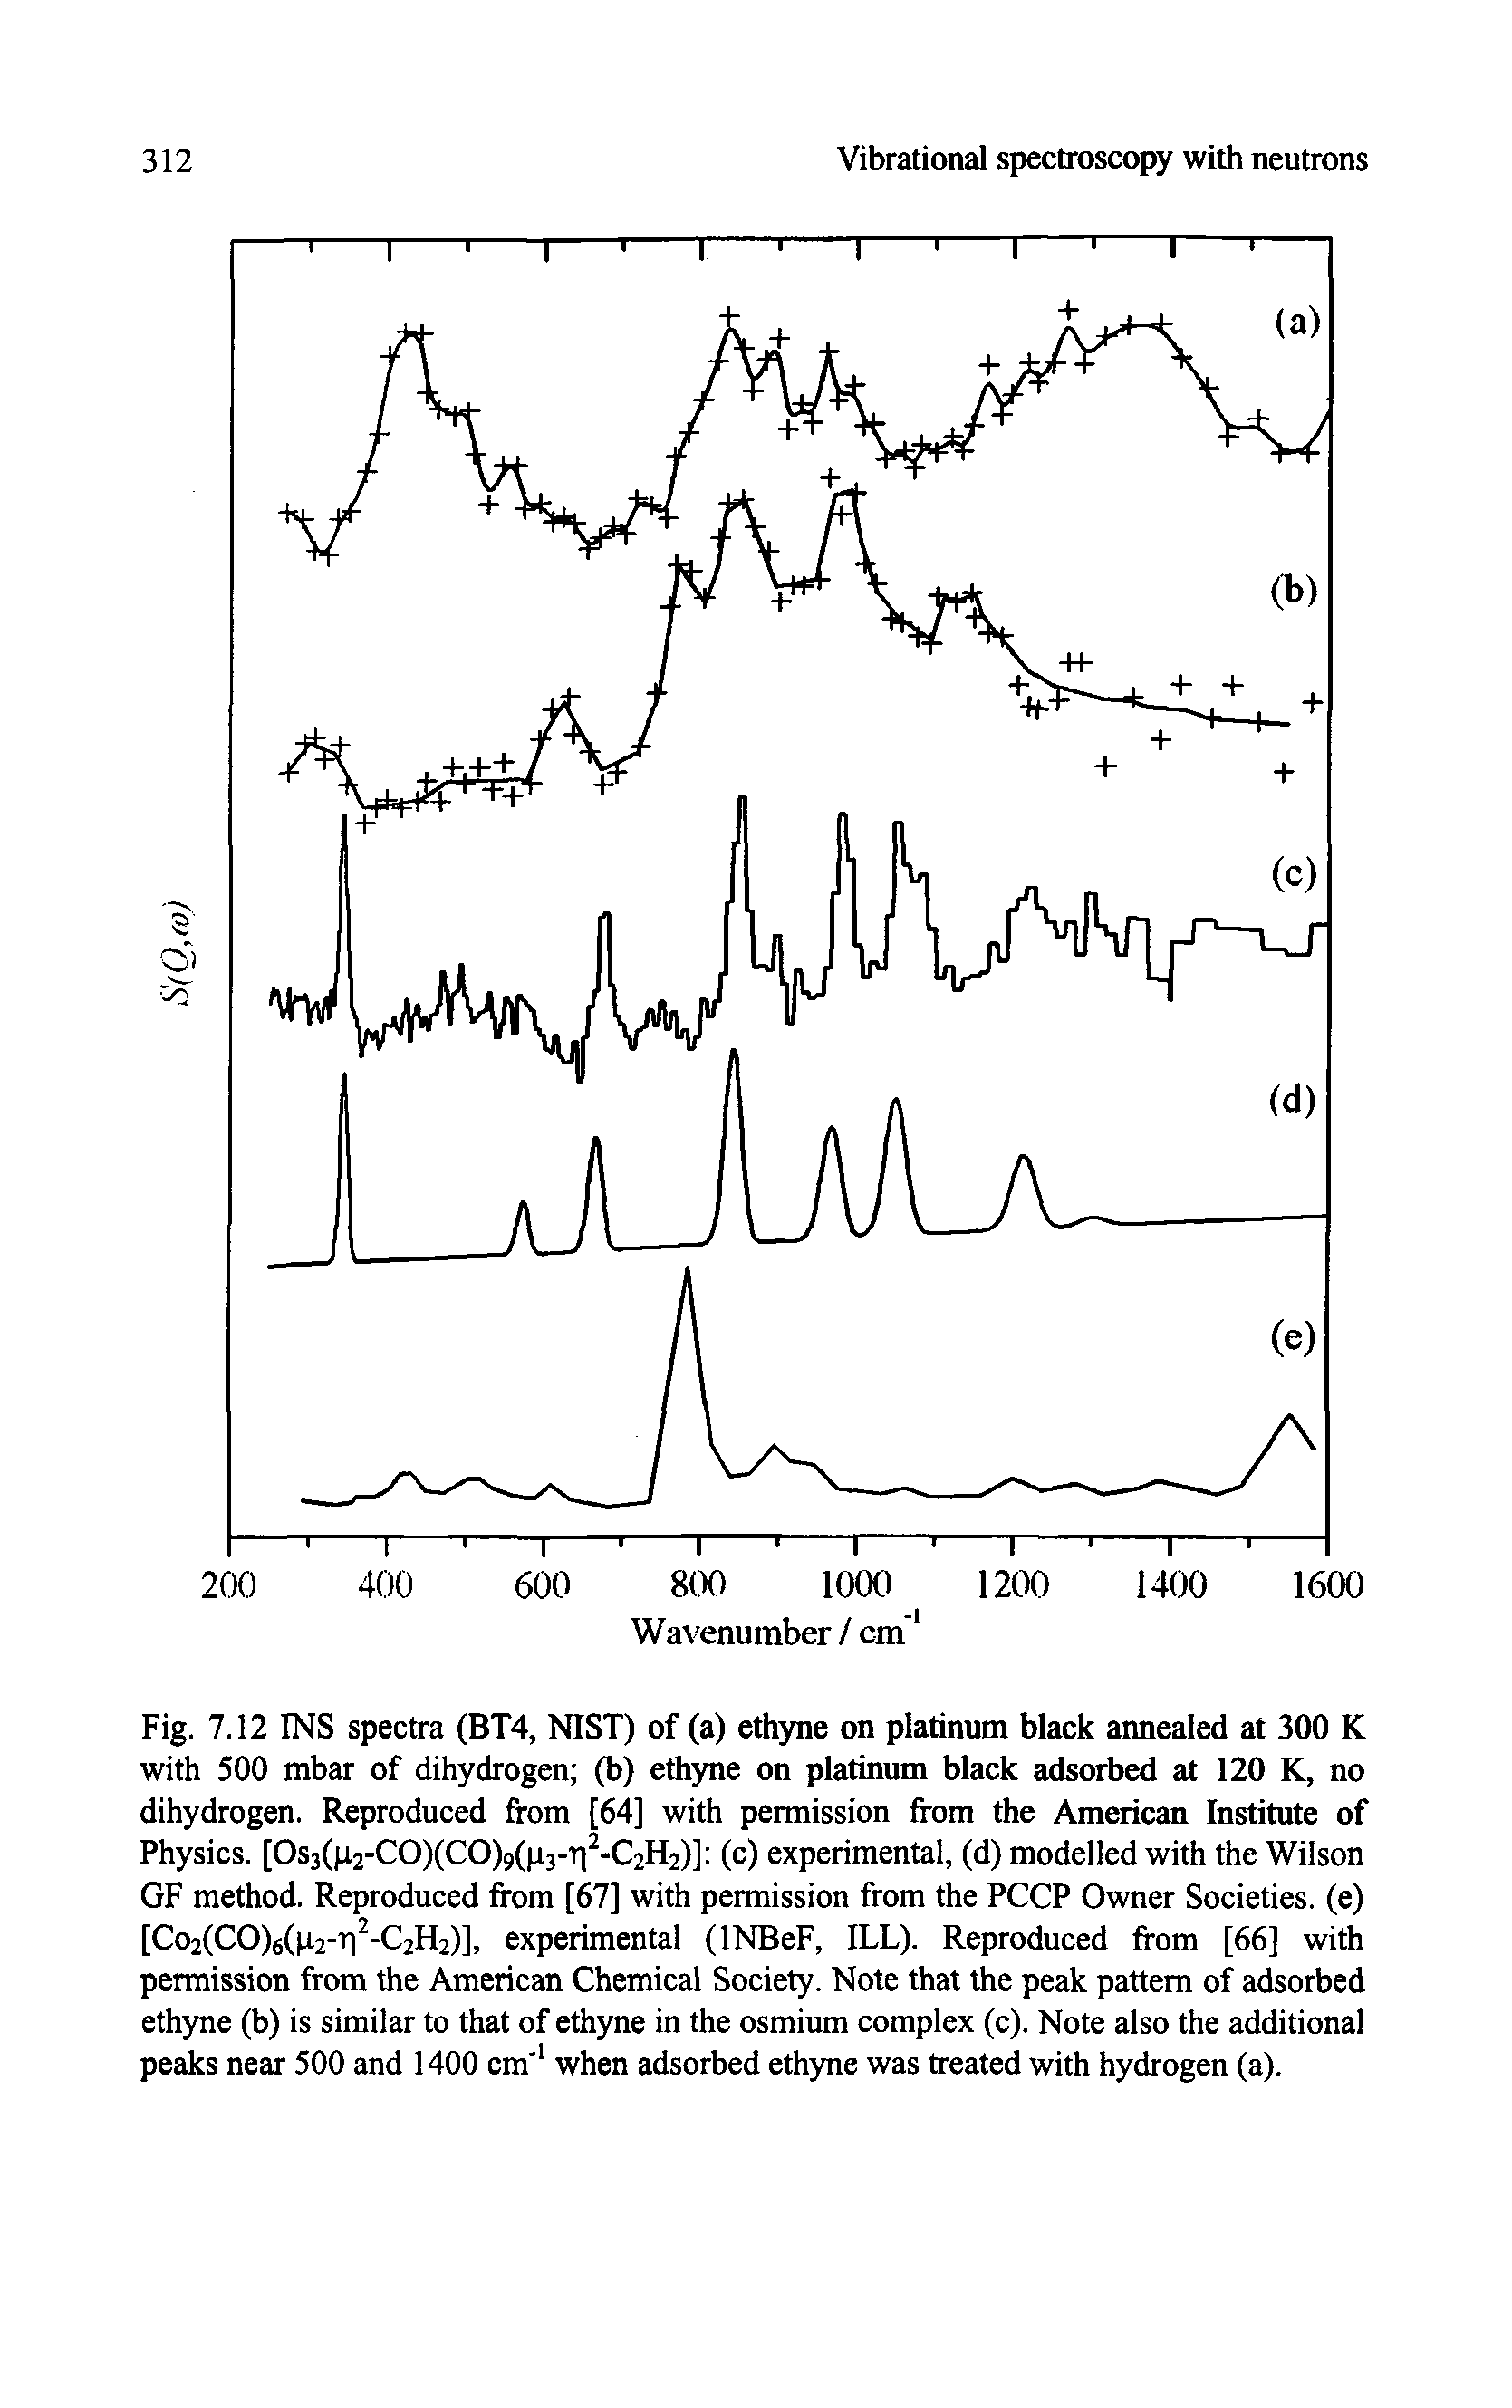 Fig. 7.12 INS spectra (BT4, NIST) of (a) ethyne on platinum black annealed at 300 K with 500 mbar of dihydrogen (b) ethyne on platinum black adsorbed at 120 K, no dihydrogen. Reproduced from [64] with permission from the American Institute of Physics. [Os3(n2-CO)(CO)9( i3-Ti -C2H2)] (c) experimental, (d) modelled with the Wilson GF method. Reproduced from [67] with permission from the PCCP Owner Societies, (e) [Co2(CO)6(li2-ri -C2H2)], experimental (INBeF, ILL). Reproduced from [66] with permission from the American Chemical Society. Note that the peak pattern of adsorbed ethyne (b) is similar to that of ethyne in the osmium complex (c). Note also the additional peaks near 500 and 1400 cm when adsorbed ethyne was treated with hydrogen (a).